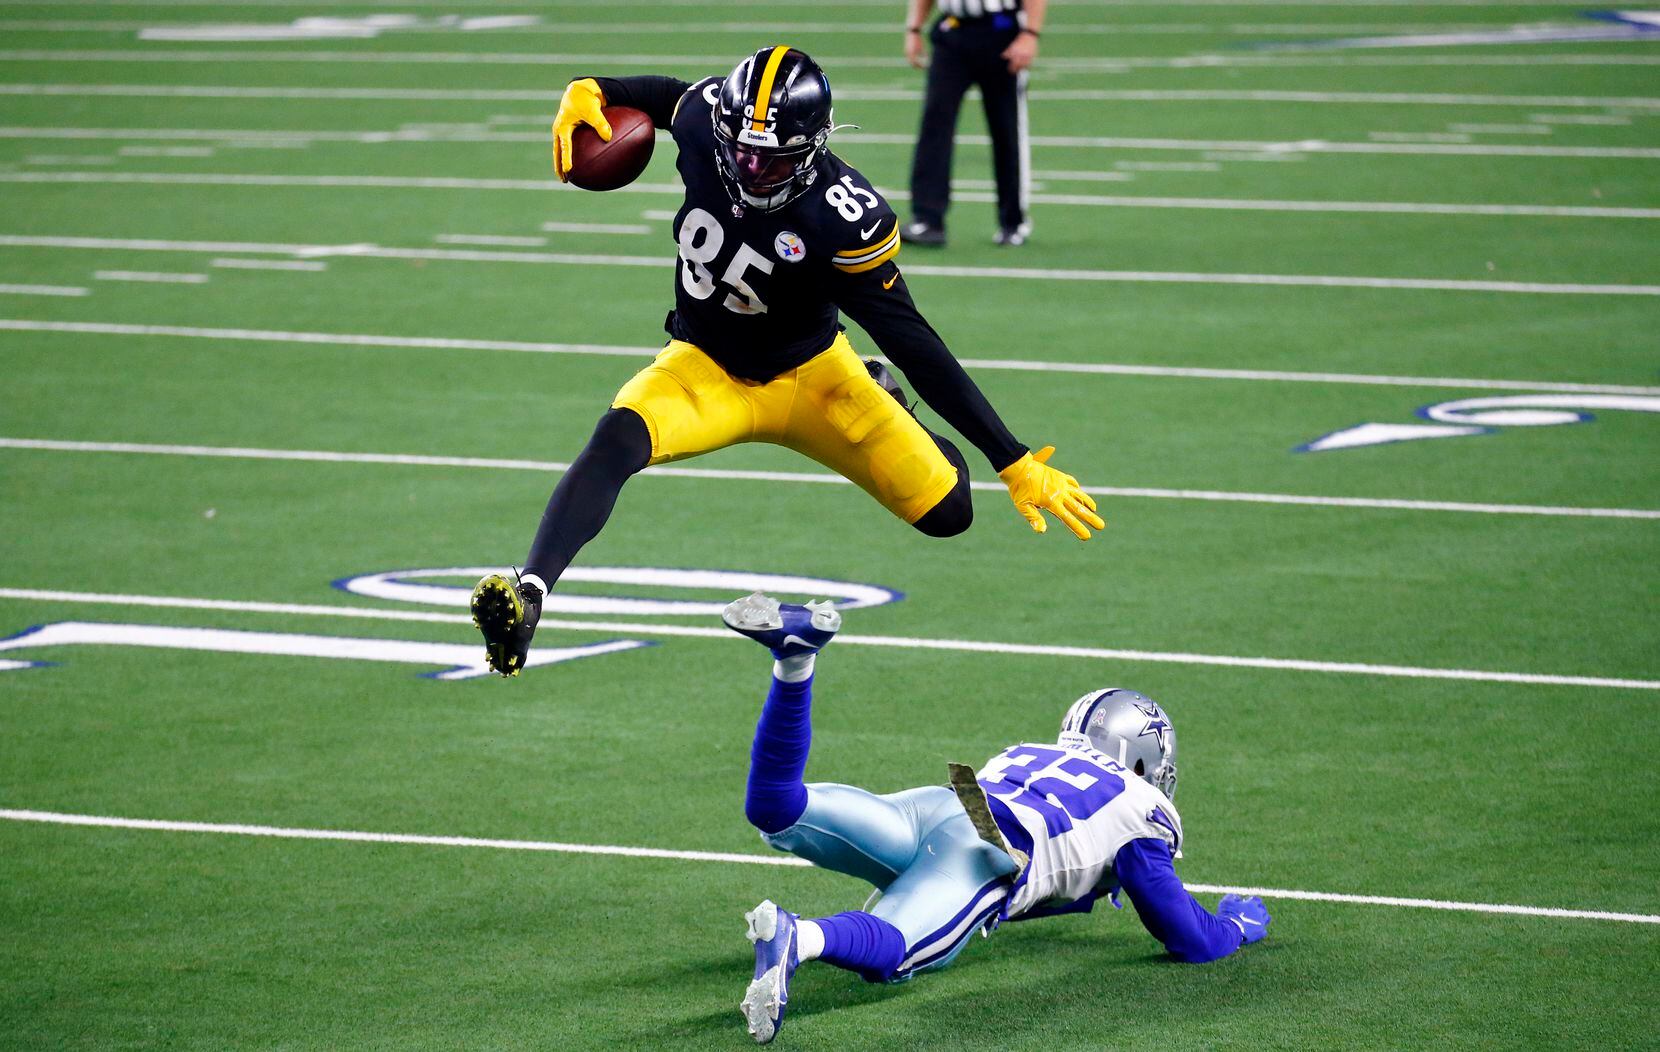 Pittsburgh Steelers tight end Eric Ebron (85) hurdles Dallas Cowboys cornerback Saivion Smith (32) to score the winning touchdown in the fourth quarter at AT&T Stadium in Arlington, Texas Sunday, November 8, 2020. The Cowboys lost, 24-19. (Tom Fox/The Dallas Morning News)